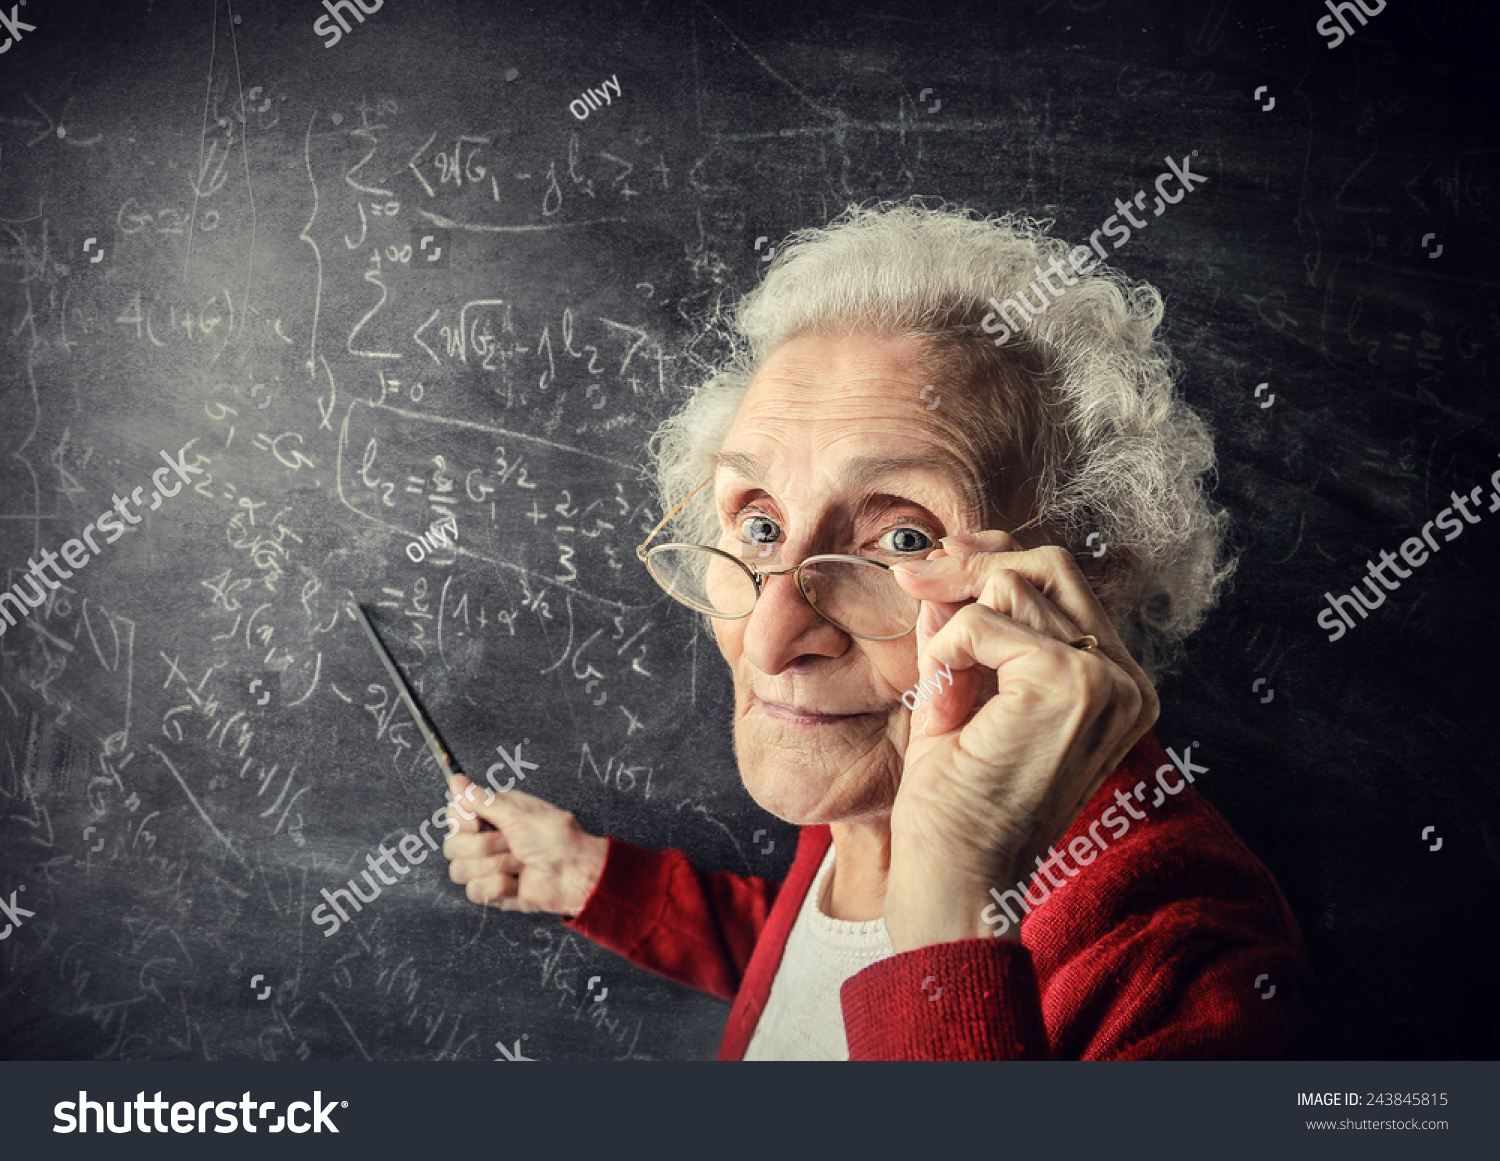  An elderly woman with white hair and glasses is standing in front of a blackboard full of mathematical equations, holding a stick and pointing at the board while looking at the camera.